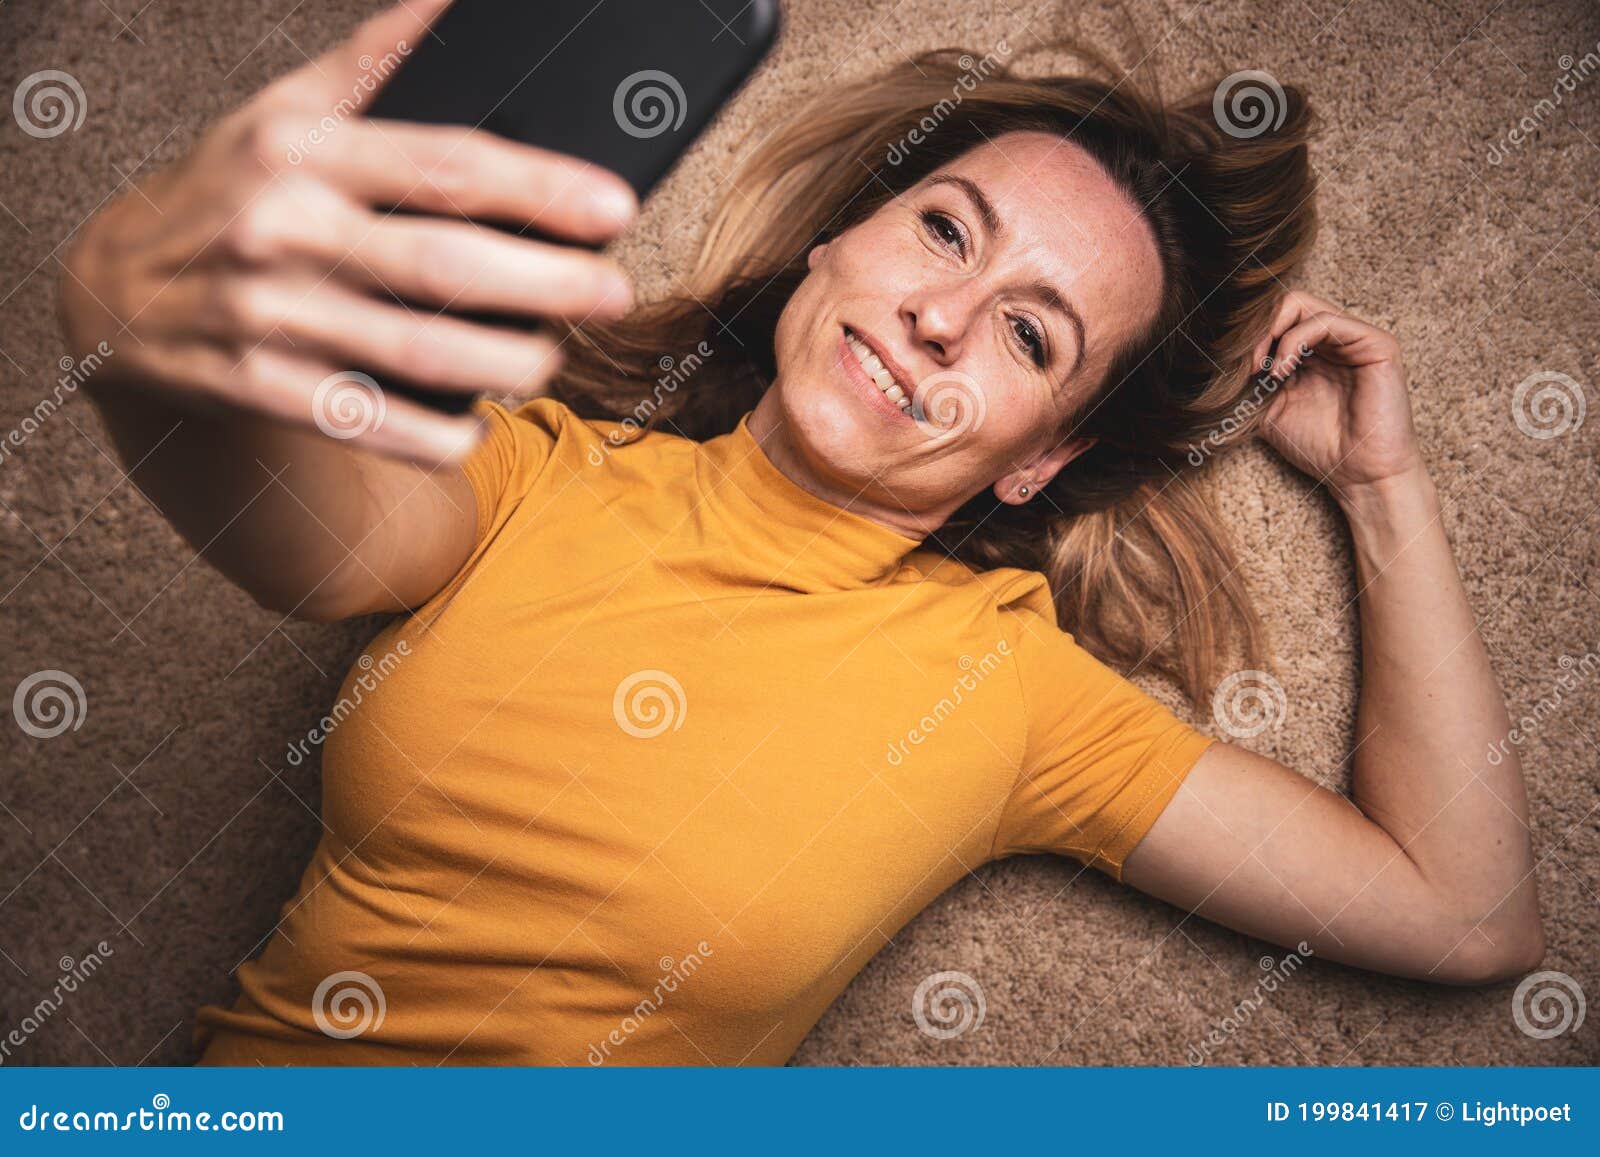 Happy Middle Aged Woman Taking Selfie With Her Smart Phone Stock Image